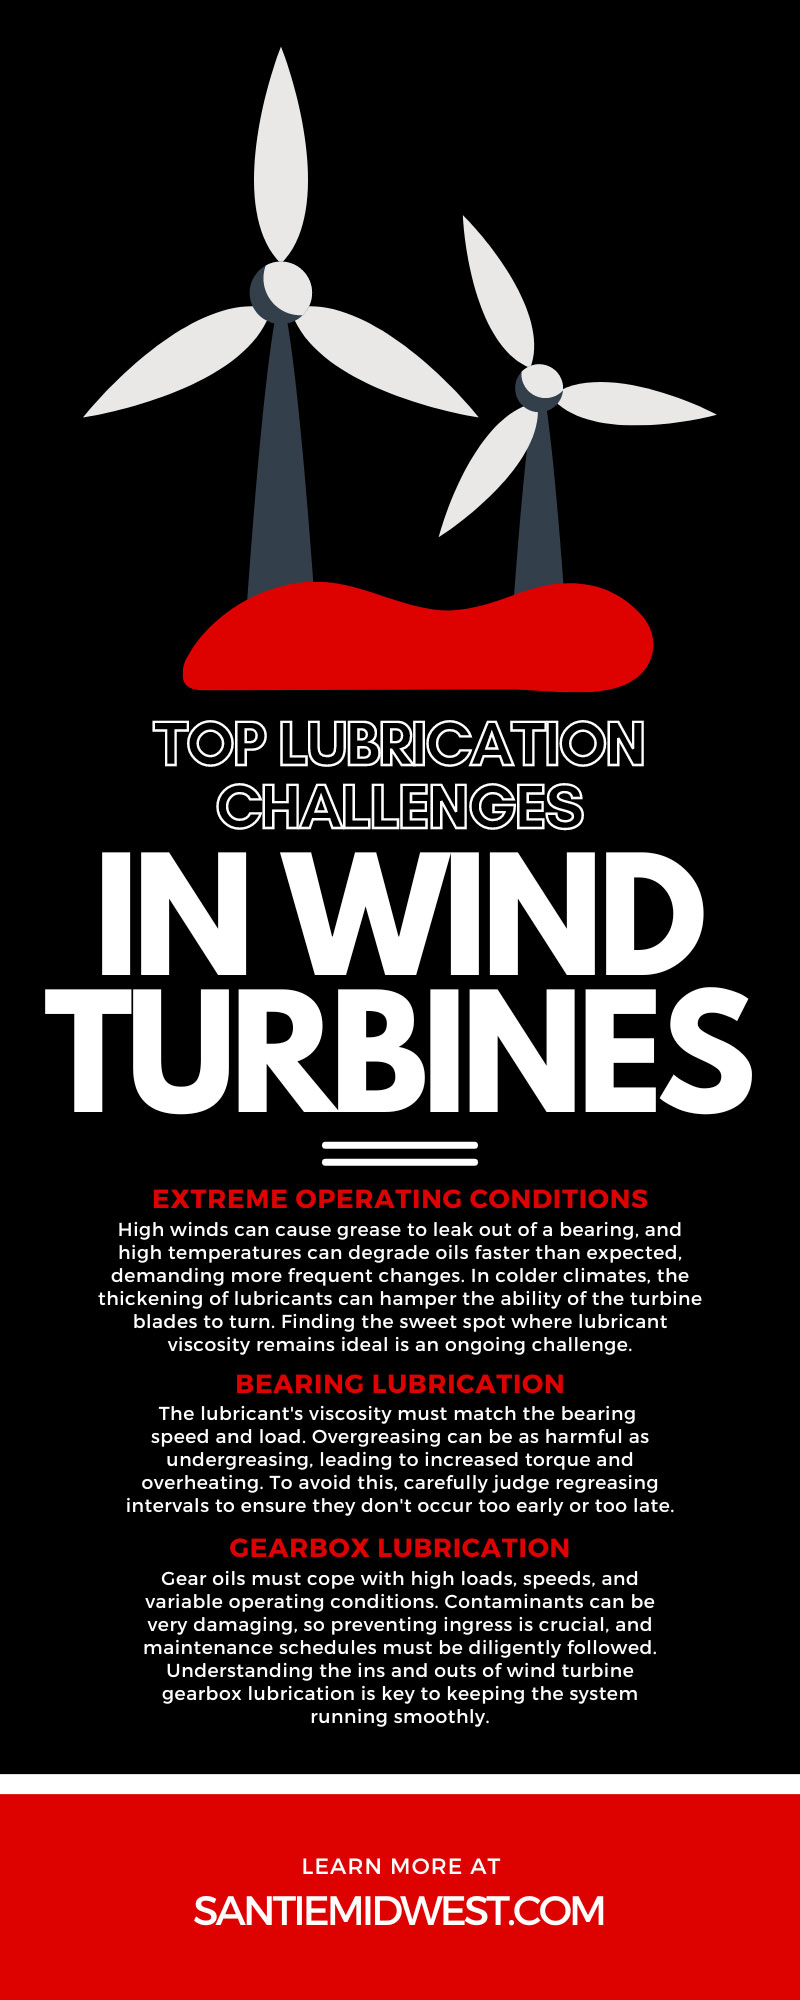 10 Top Lubrication Challenges in Wind Turbines